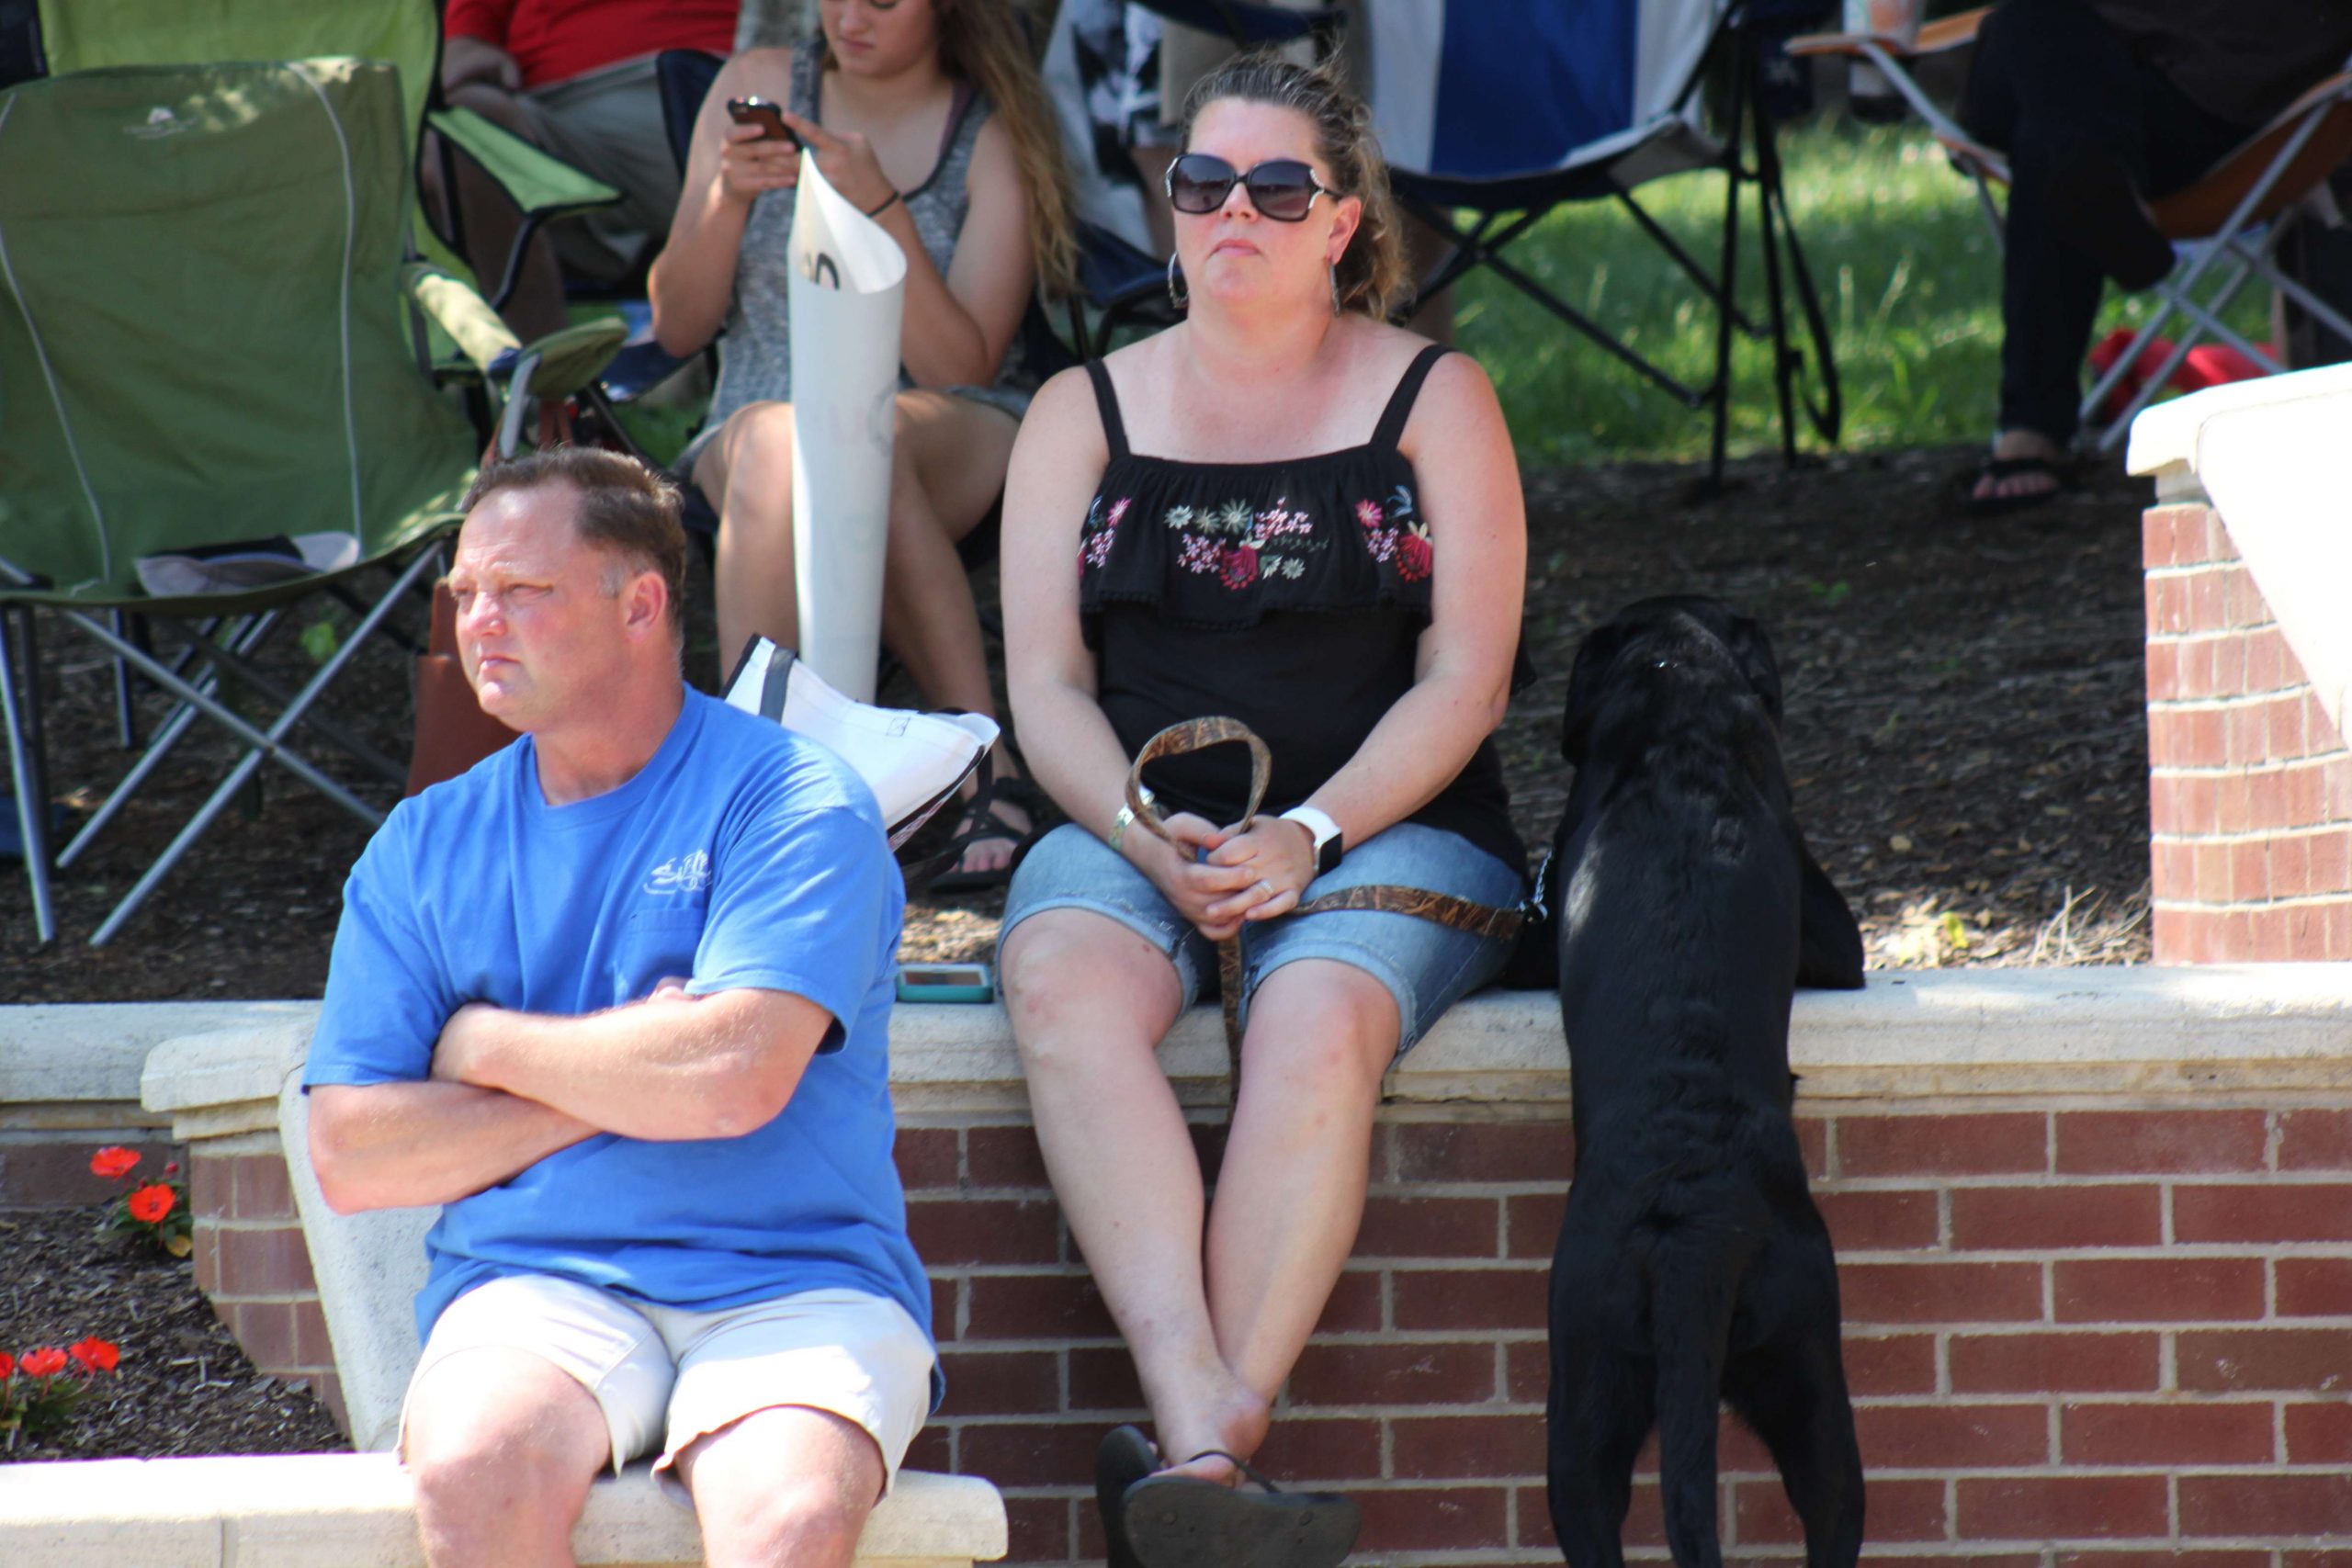 There were a couple canine fans on hand, as well.